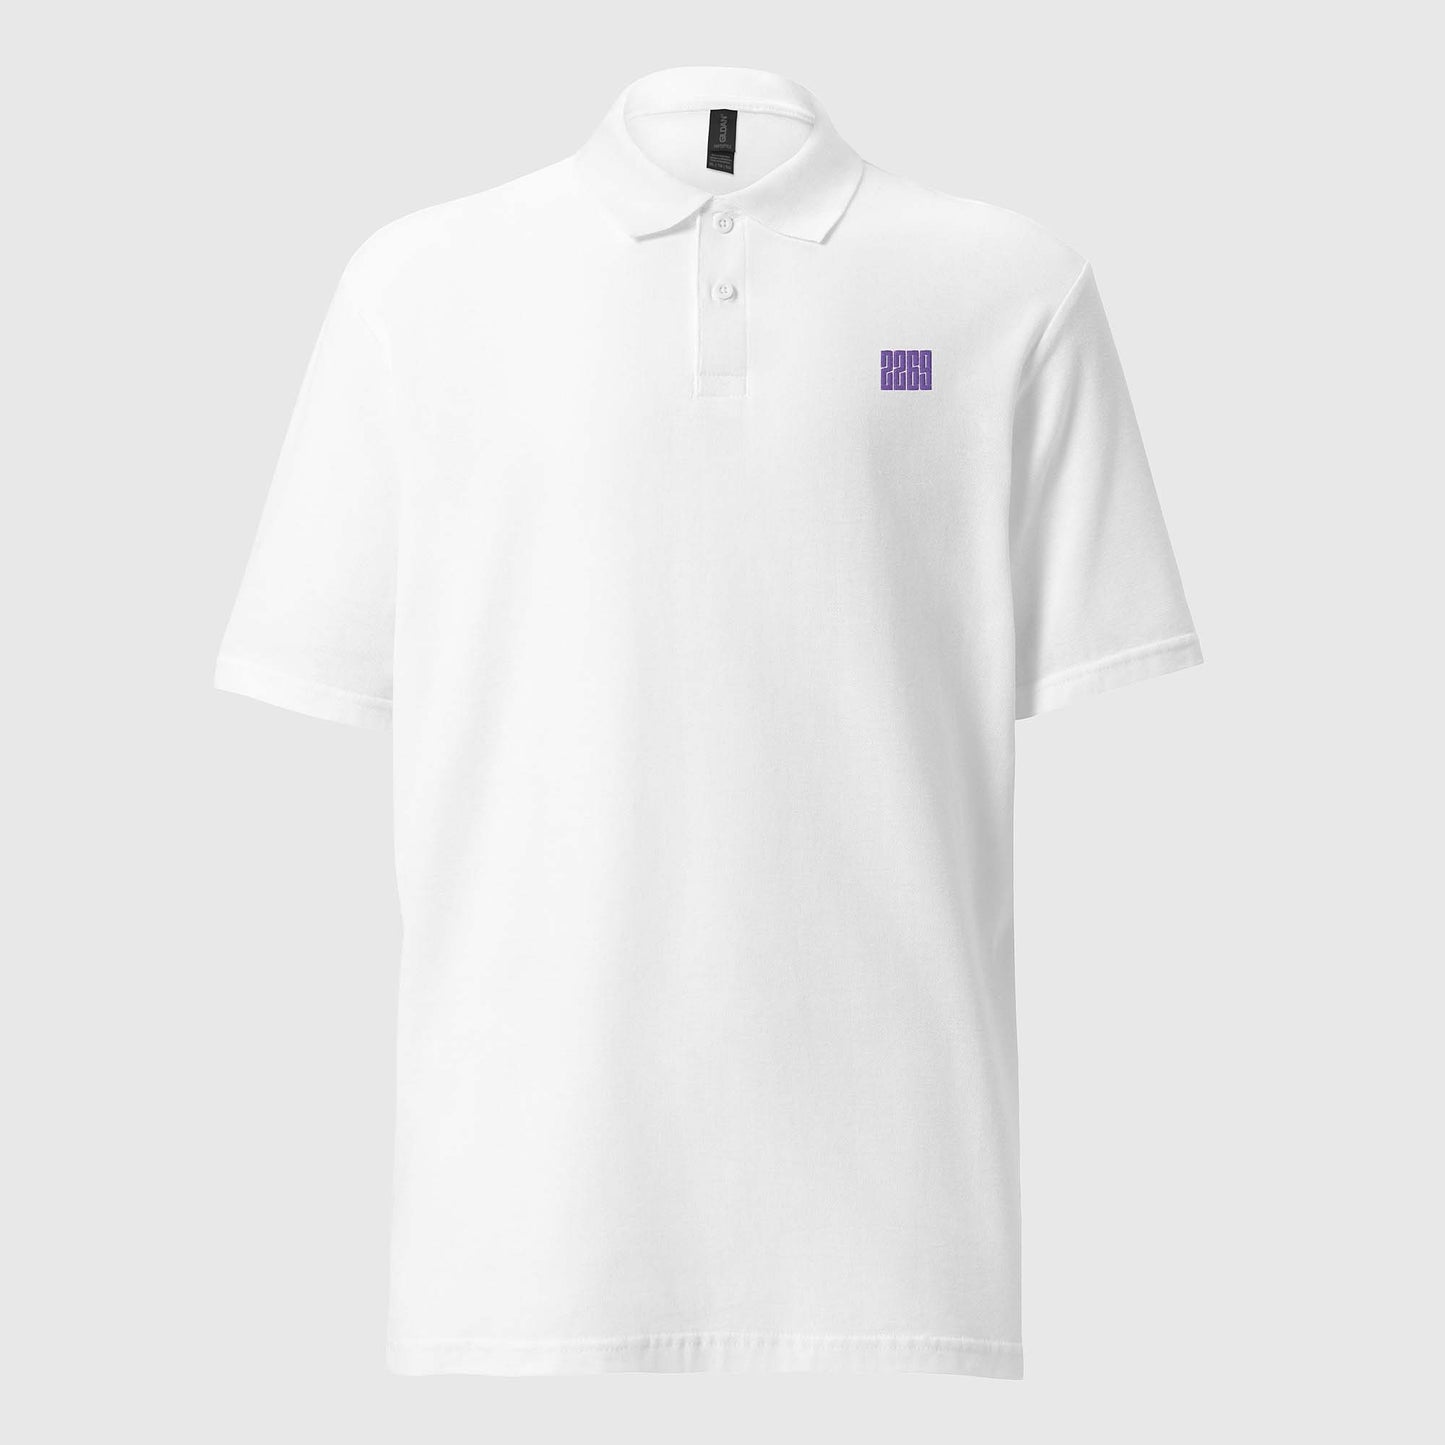 Unisex white pique polo shirt with embroidered 2269 logo